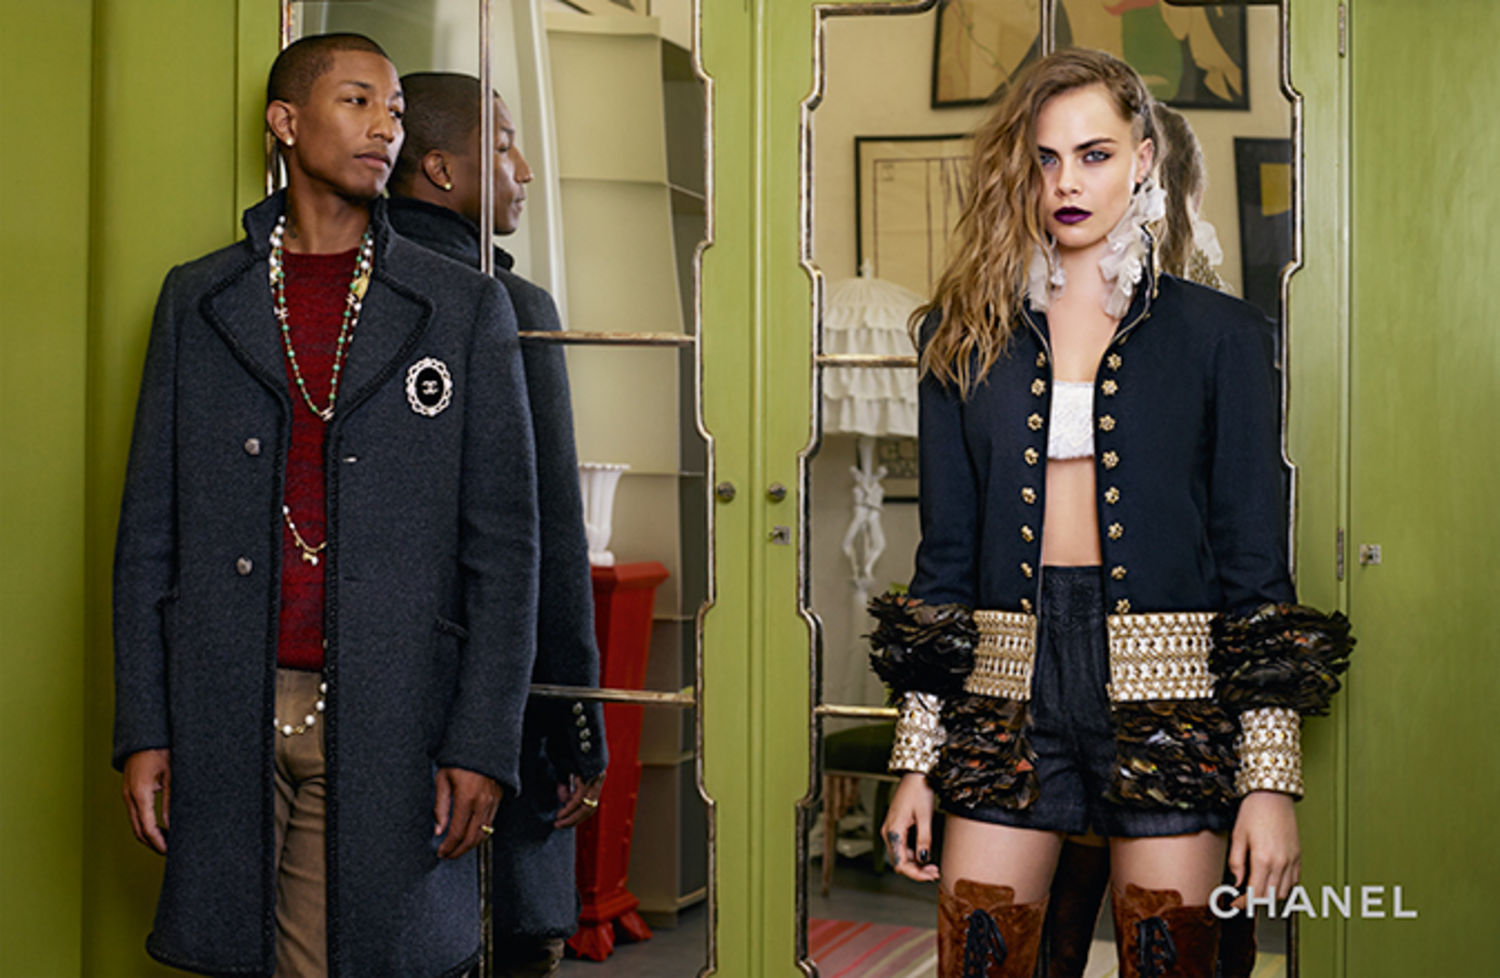 Watch Pharrell Bring Cara Delevingne On Stage To Perform Together